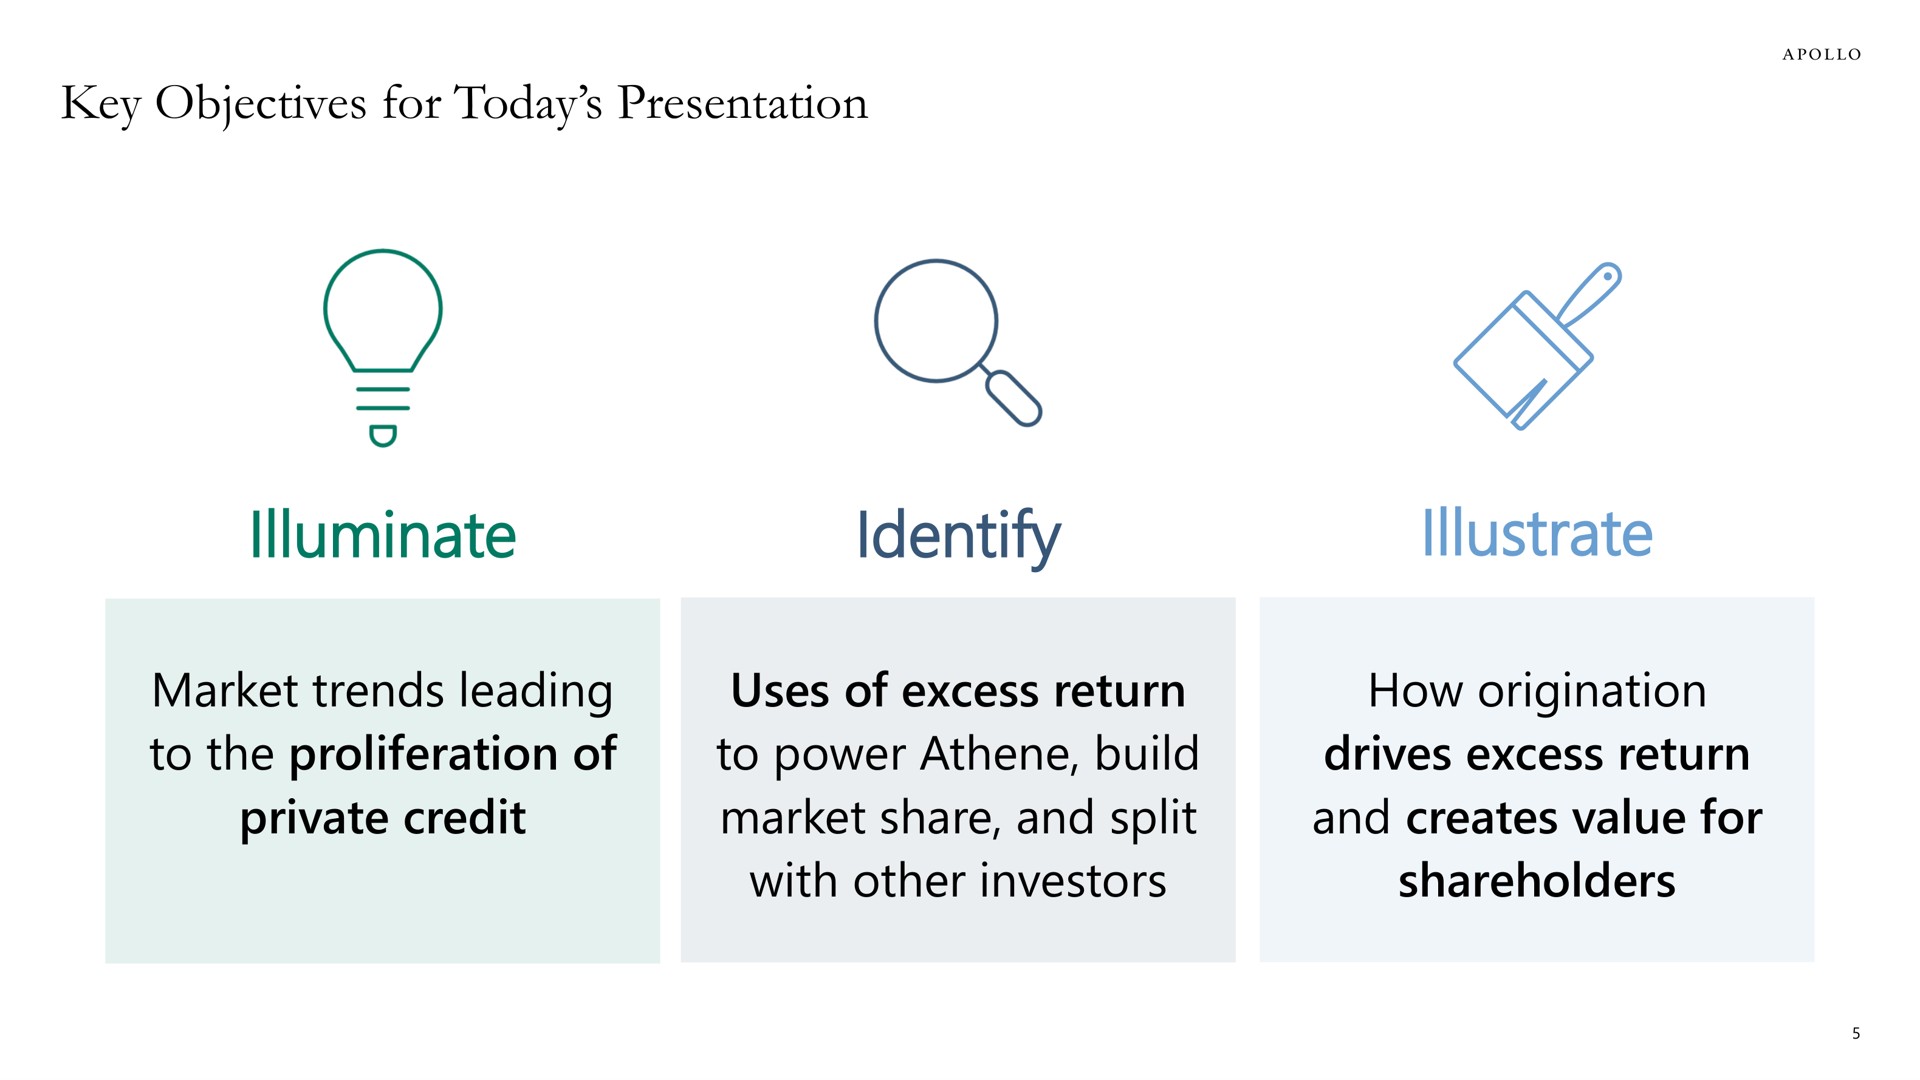 key objectives for today presentation illuminate identify illustrate market trends leading to the proliferation of private credit uses of excess return to power build market share and split with other investors how origination drives excess return and creates value for shareholders | Apollo Global Management